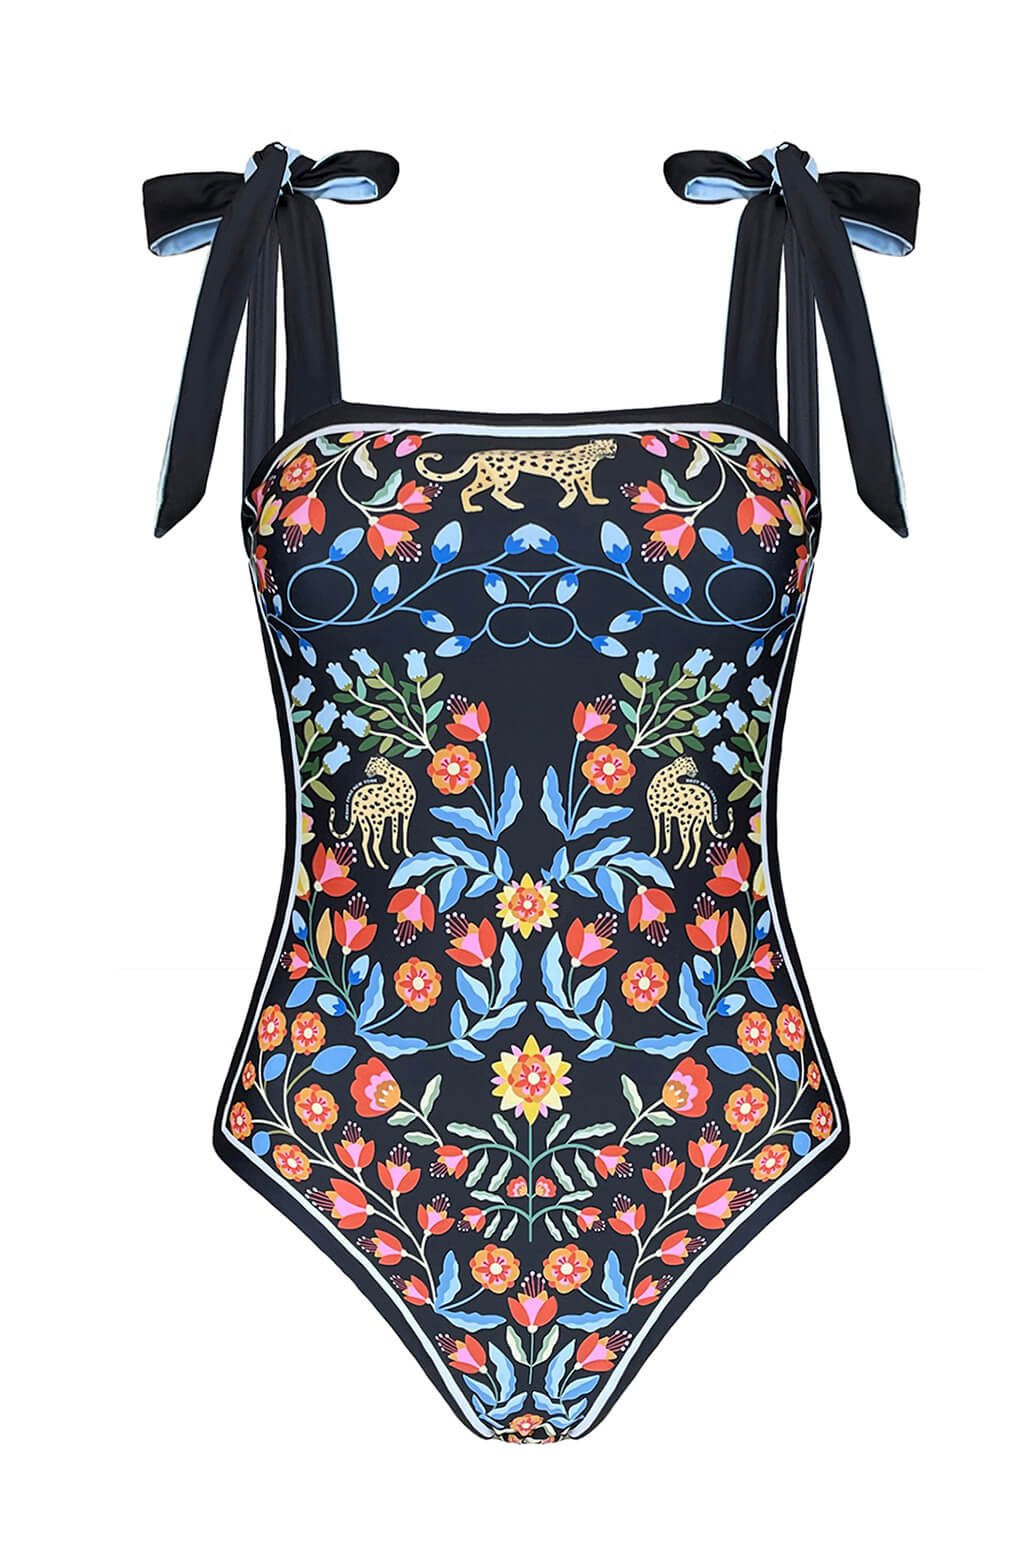 Reversible swimsuit - two looks in one! Featuring original hand-drawn  prints on both sides.